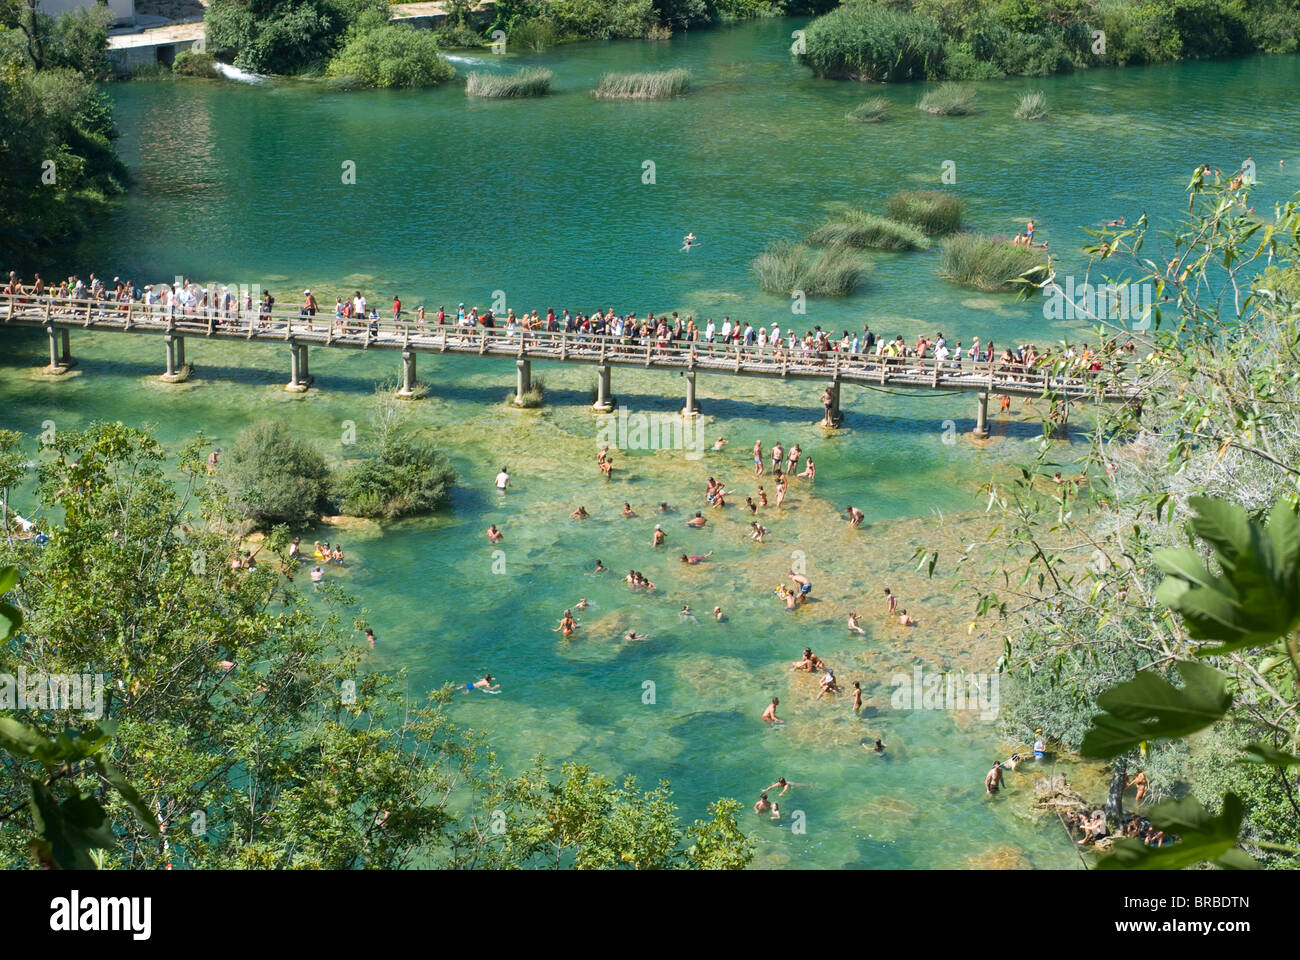 Bridge with many tourists above turquoise water in the Krka National Park, Croatia Stock Photo